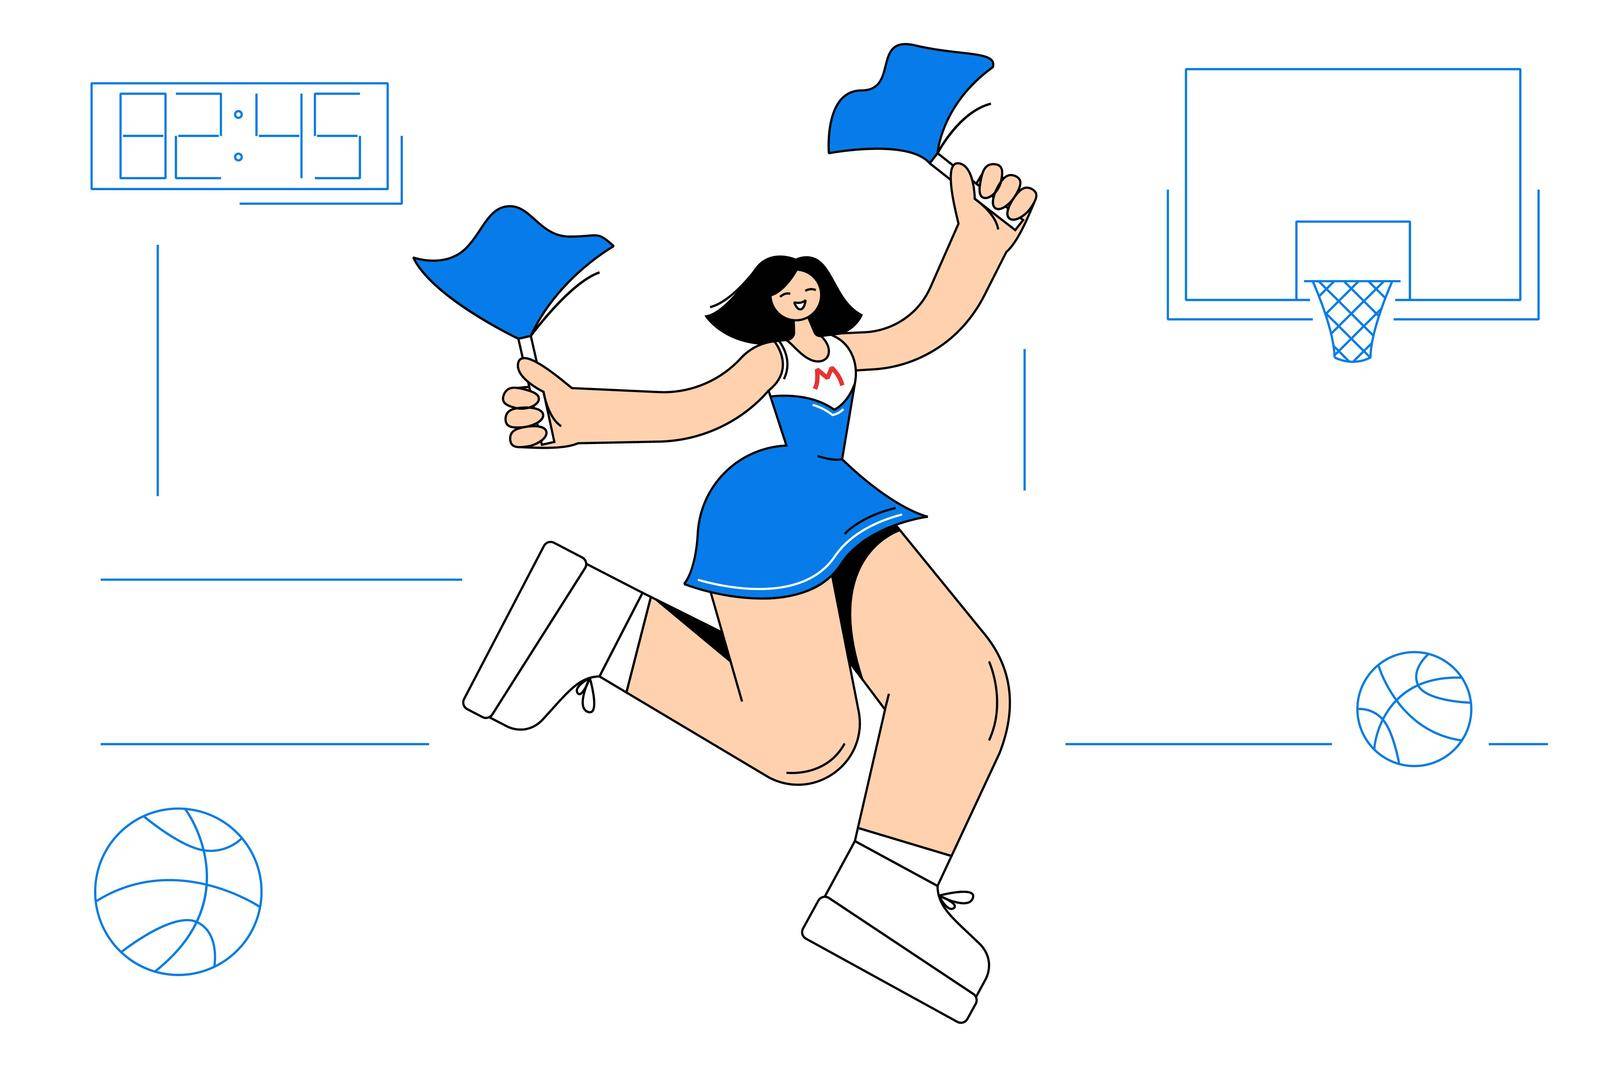 Cheerleading, dancing, cheer sport concept. Young beautiful smiling girl cheerleader cartoon character in blue costume dancing moving with pompoms and jumping during performance on basketball game